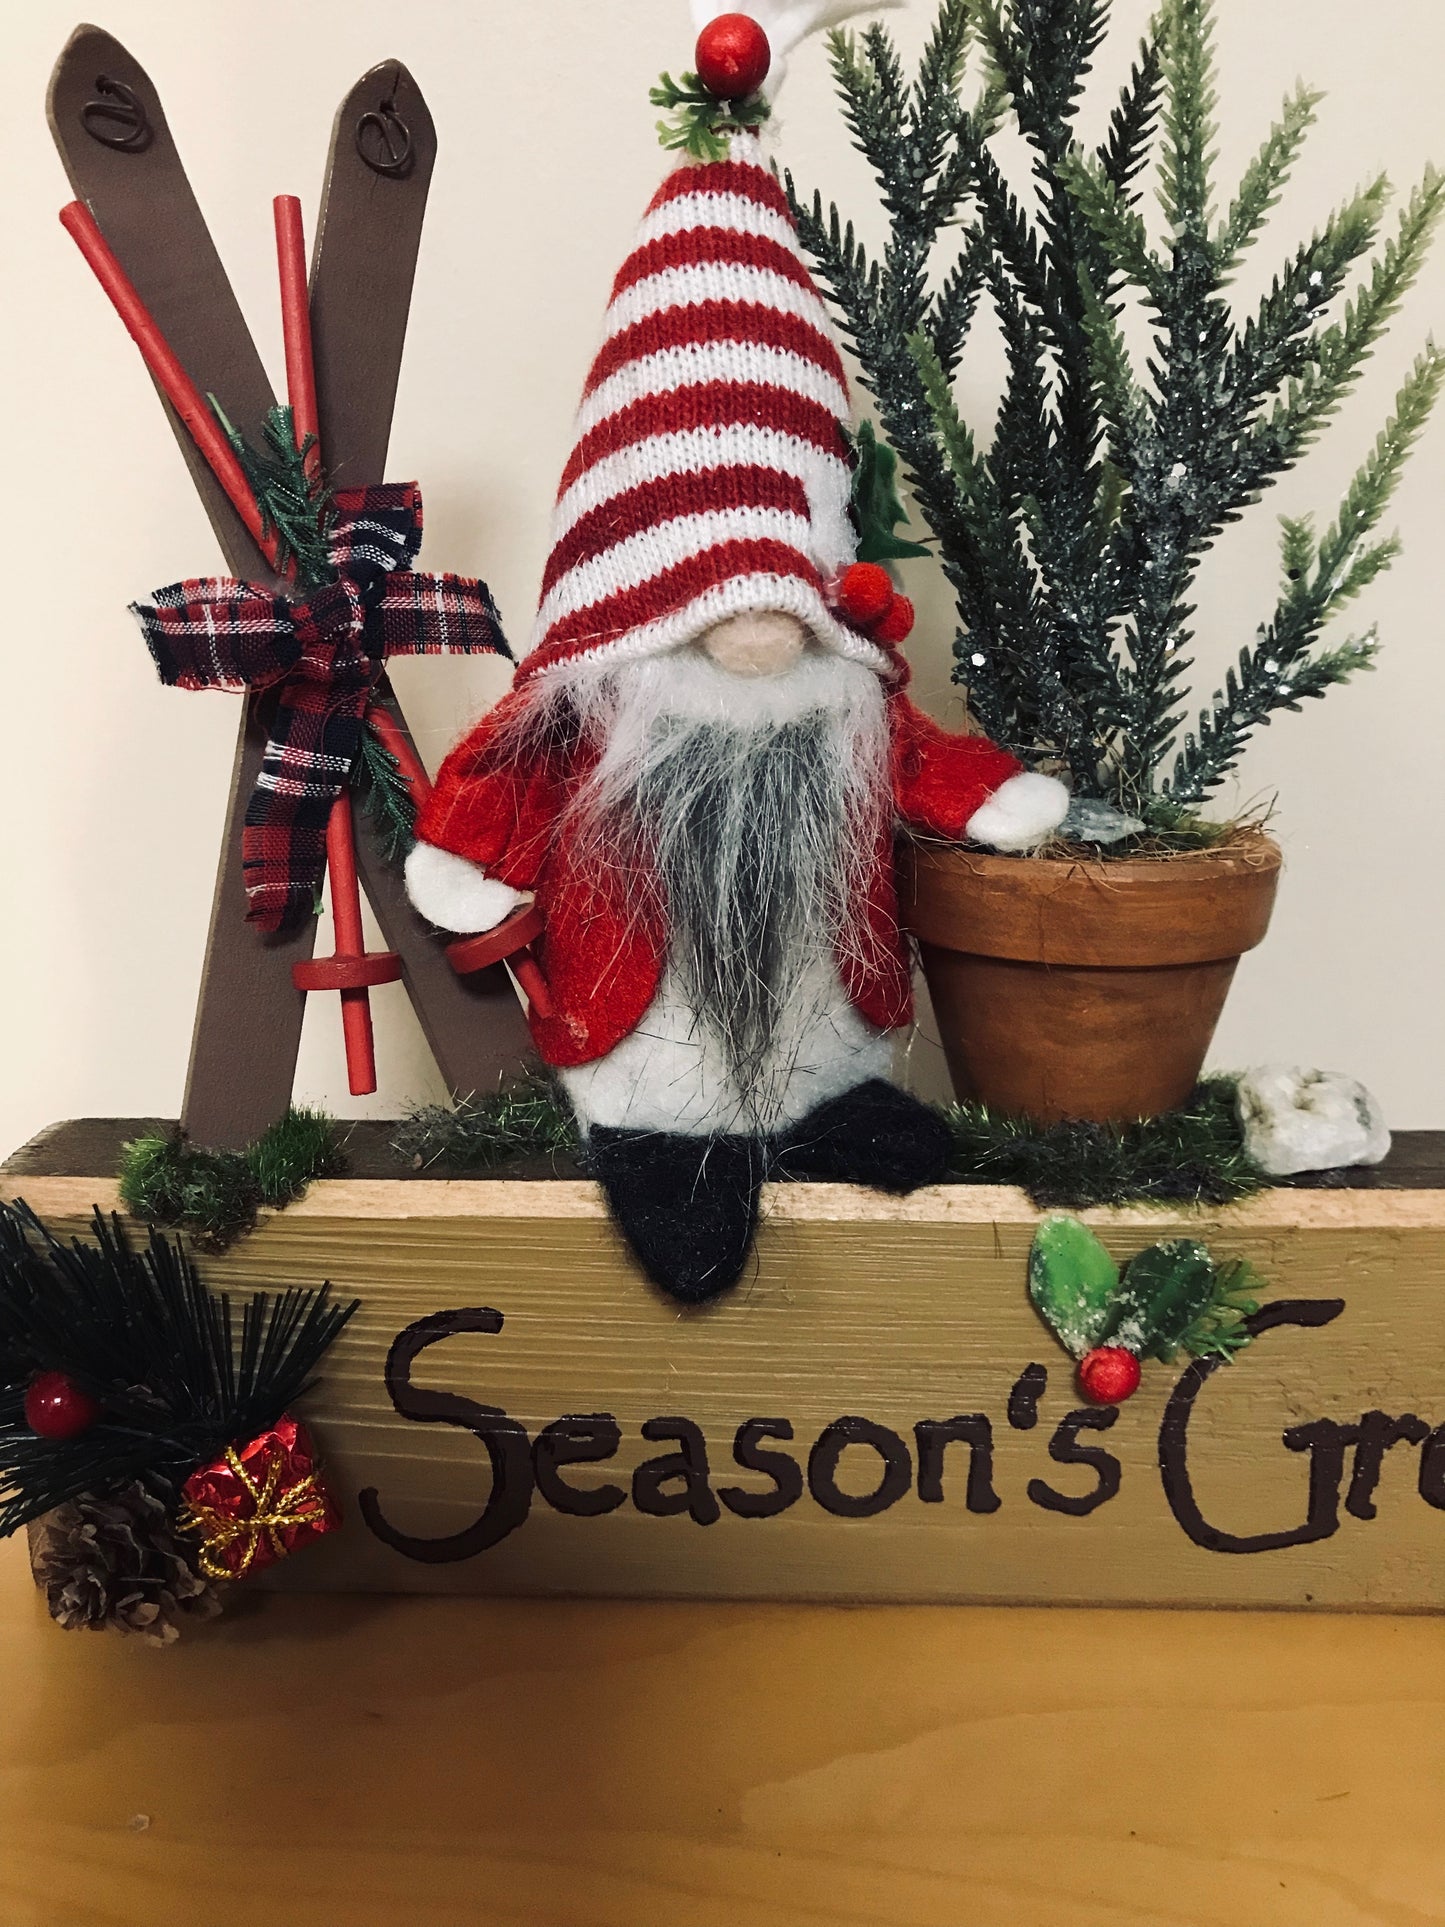 Season's Greetings with Gnome and Skis